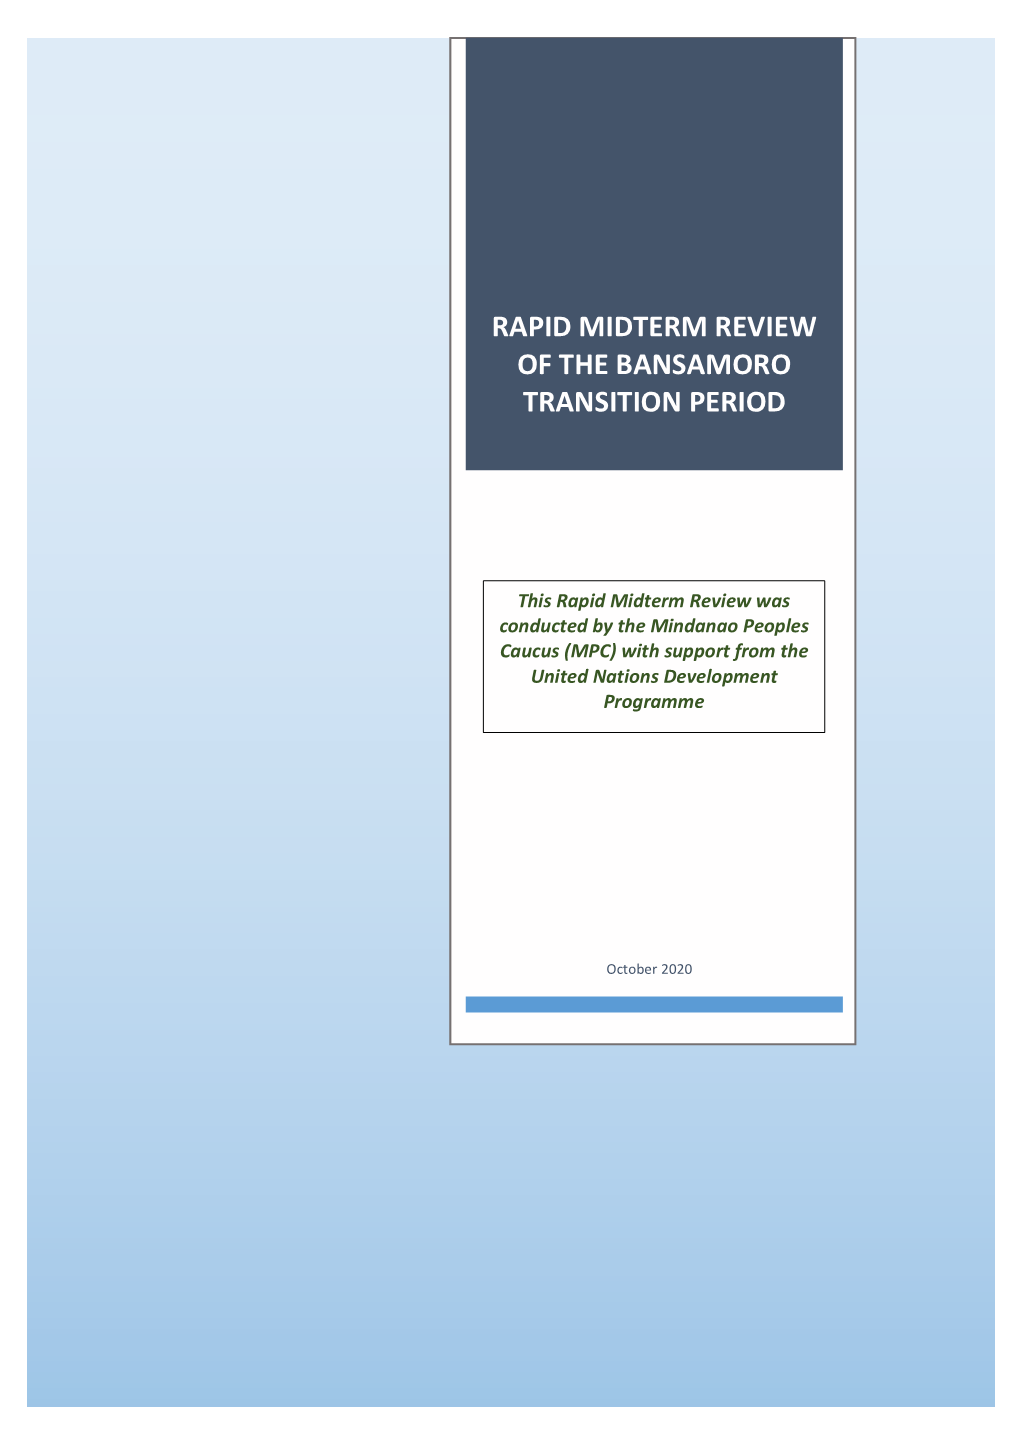 Rapid Midterm Review of the Bansamoro Transition Period